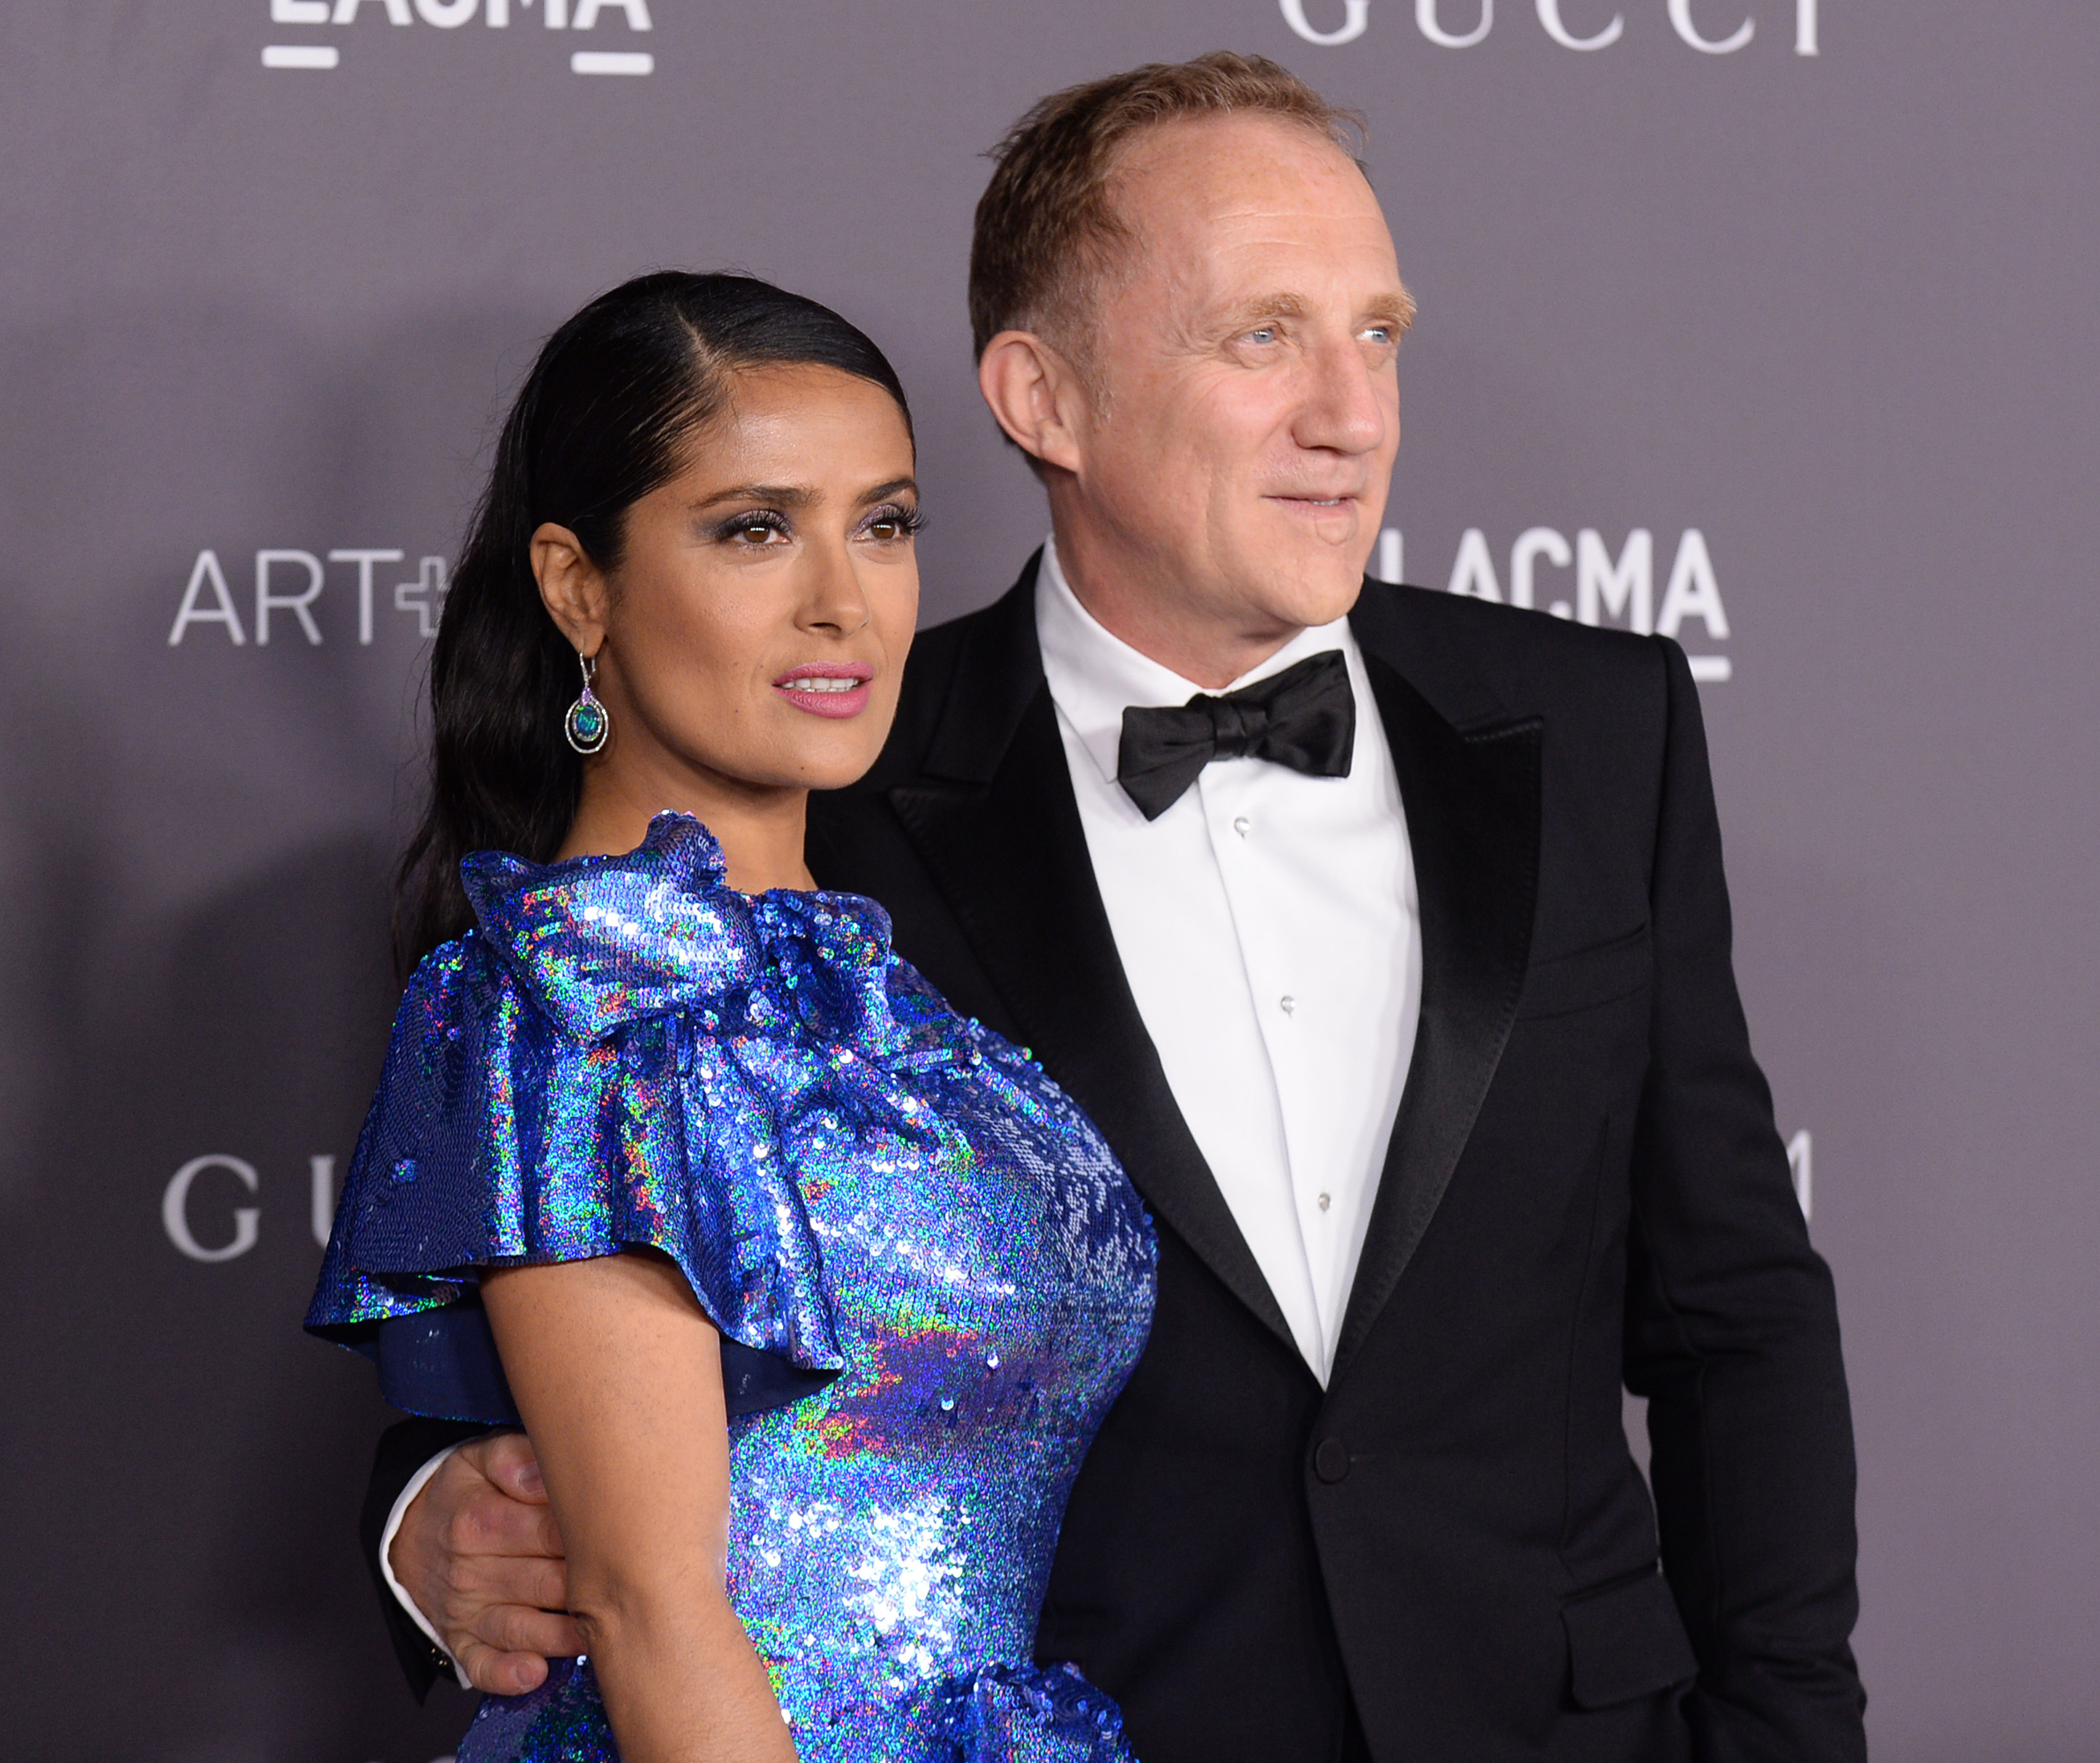 Who Is François-Henri Pinault? - Meet Salma Hayek's Husband and Kering's CEO